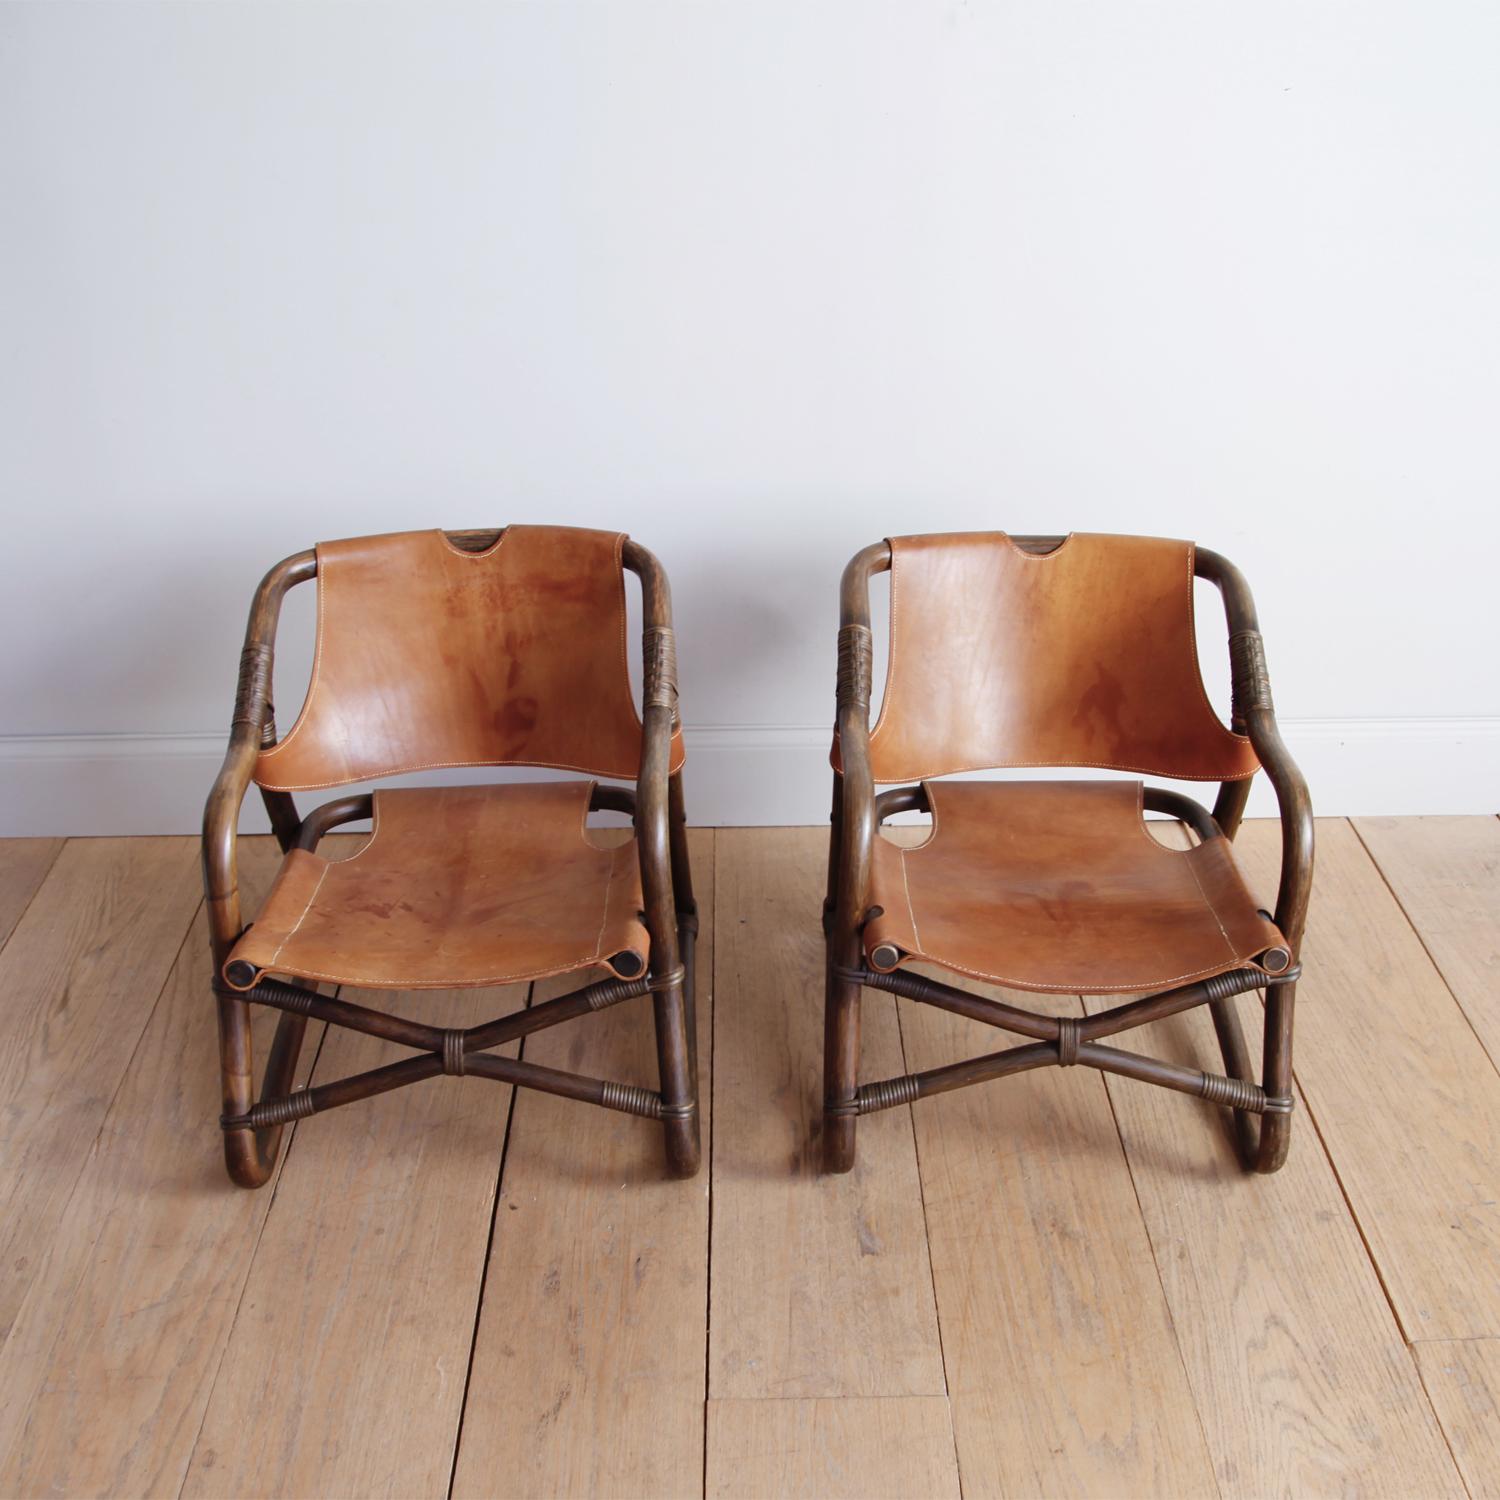 Swedish Pair of Bent Bamboo and Leather Lounge Chairs